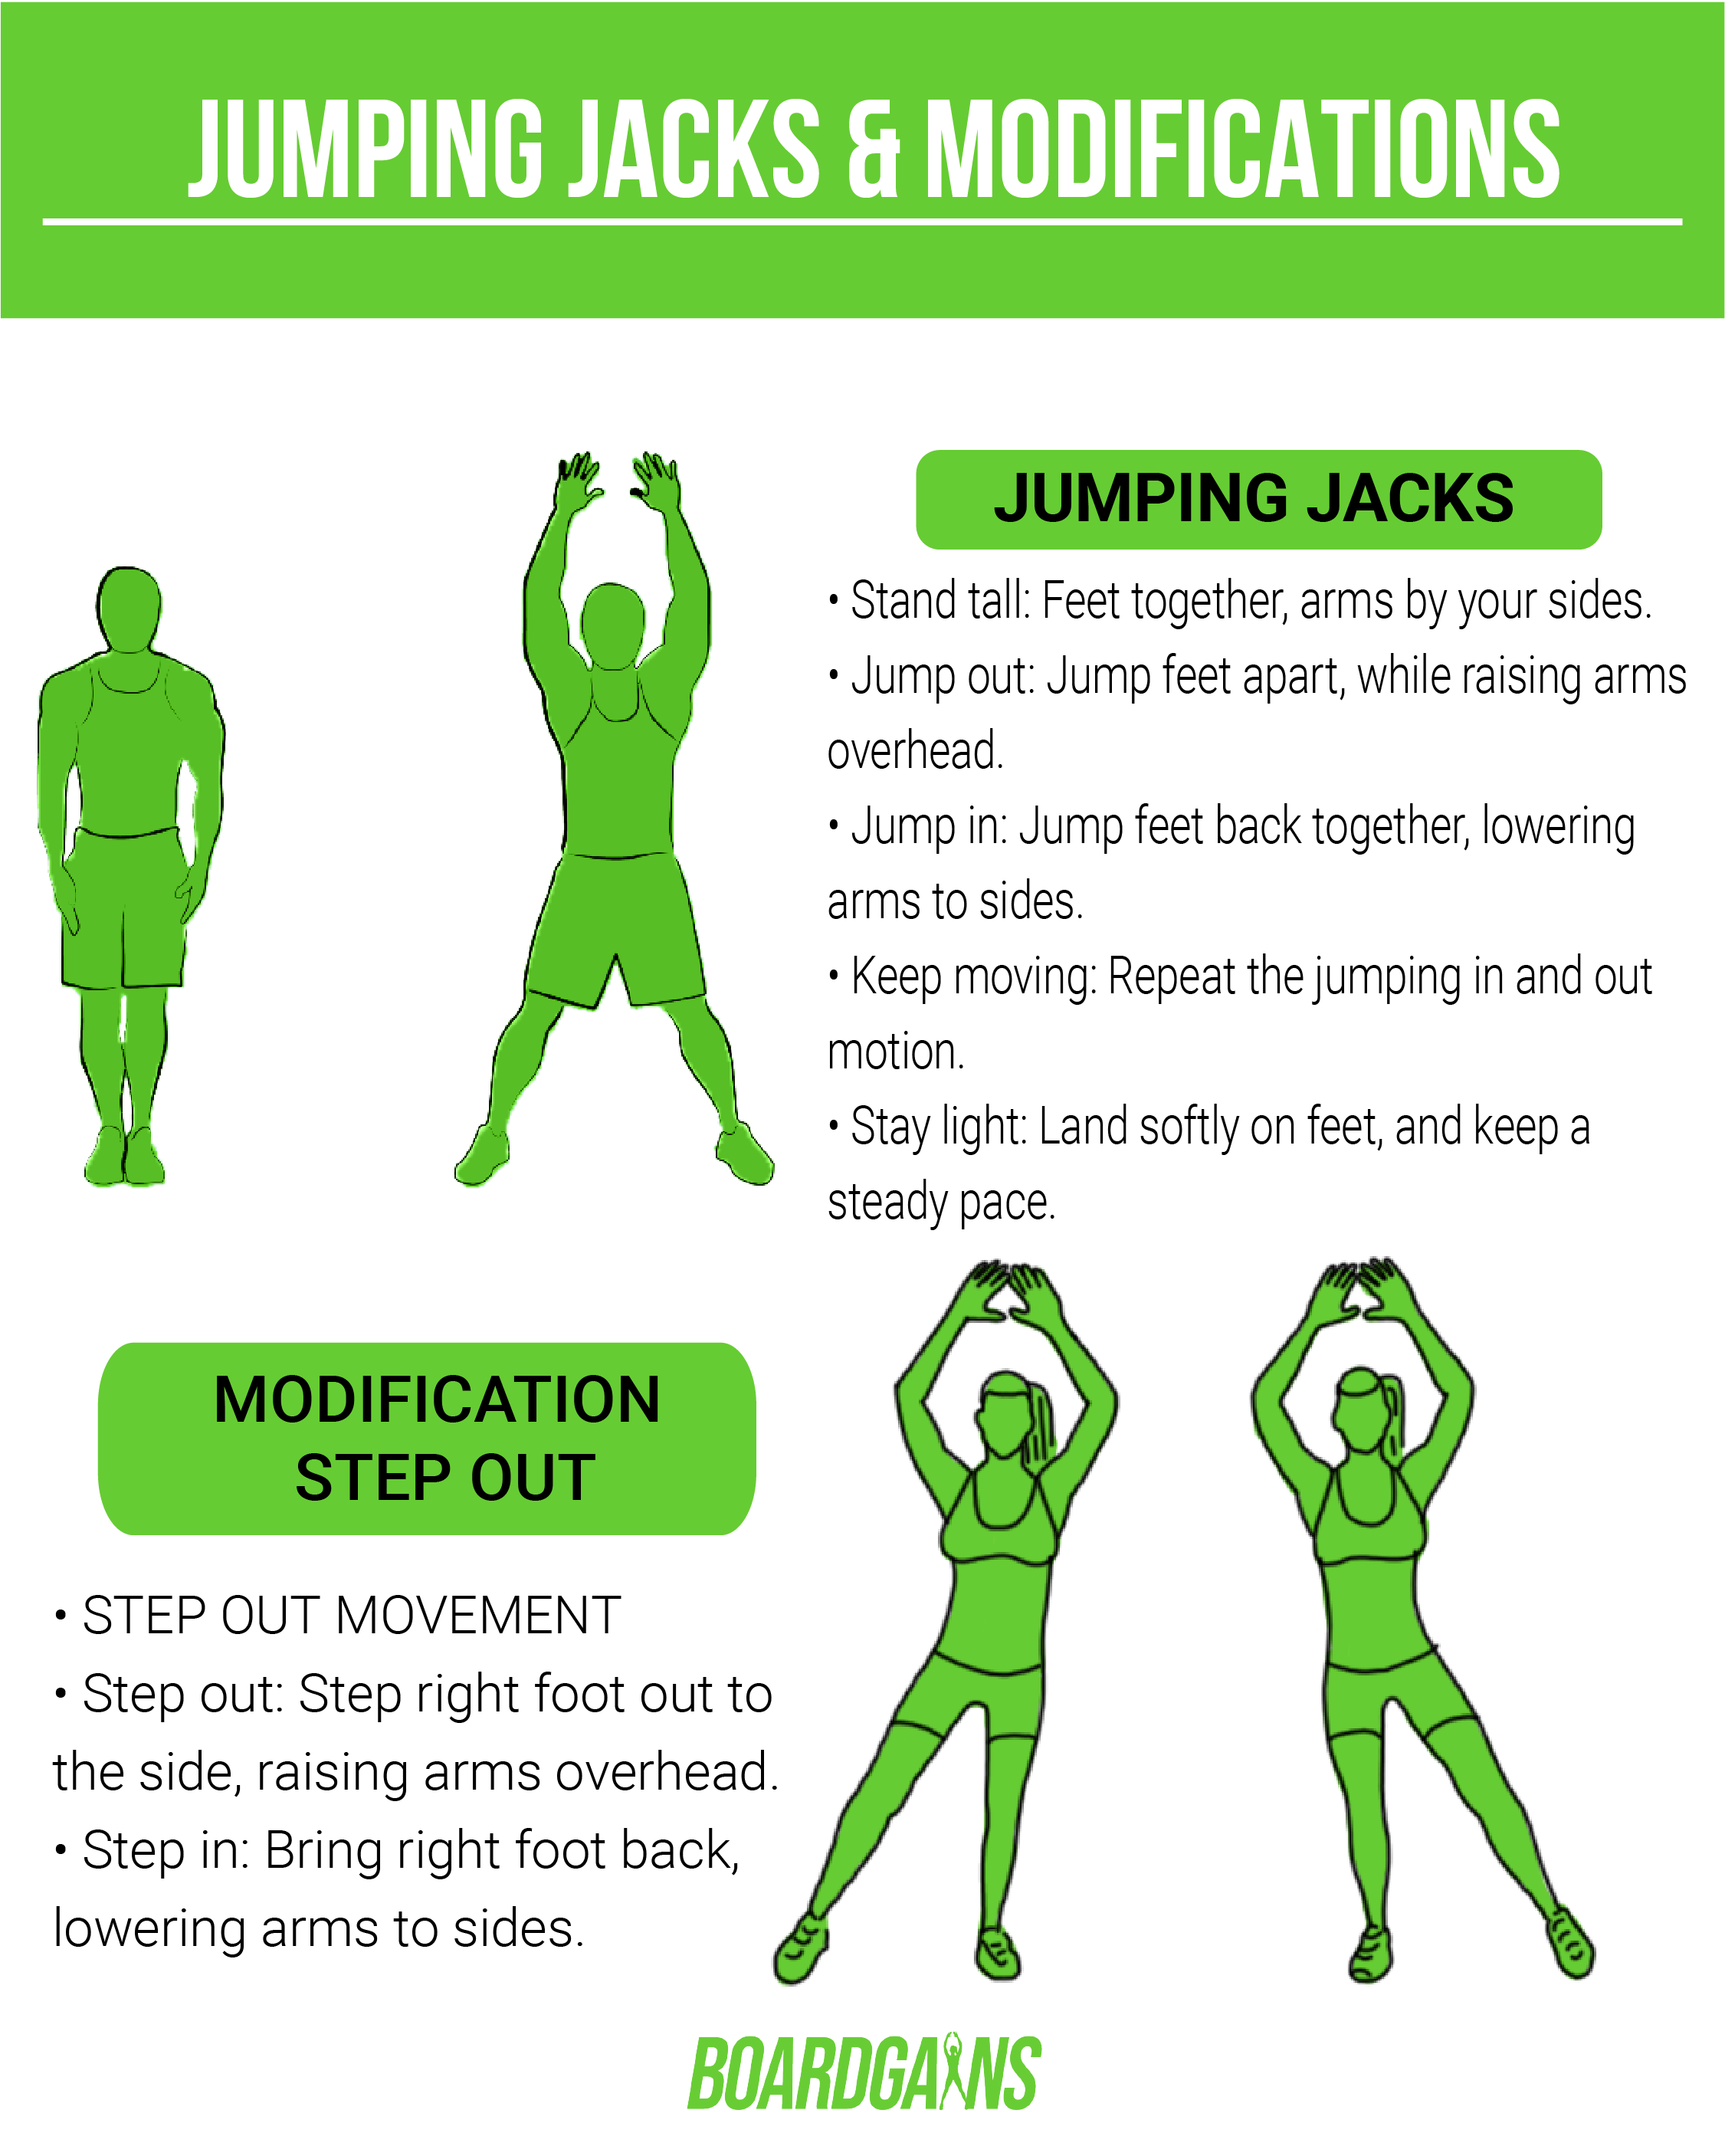 7 Jumping Jack Variations That Will Do You More Good Than You Think – DMoose